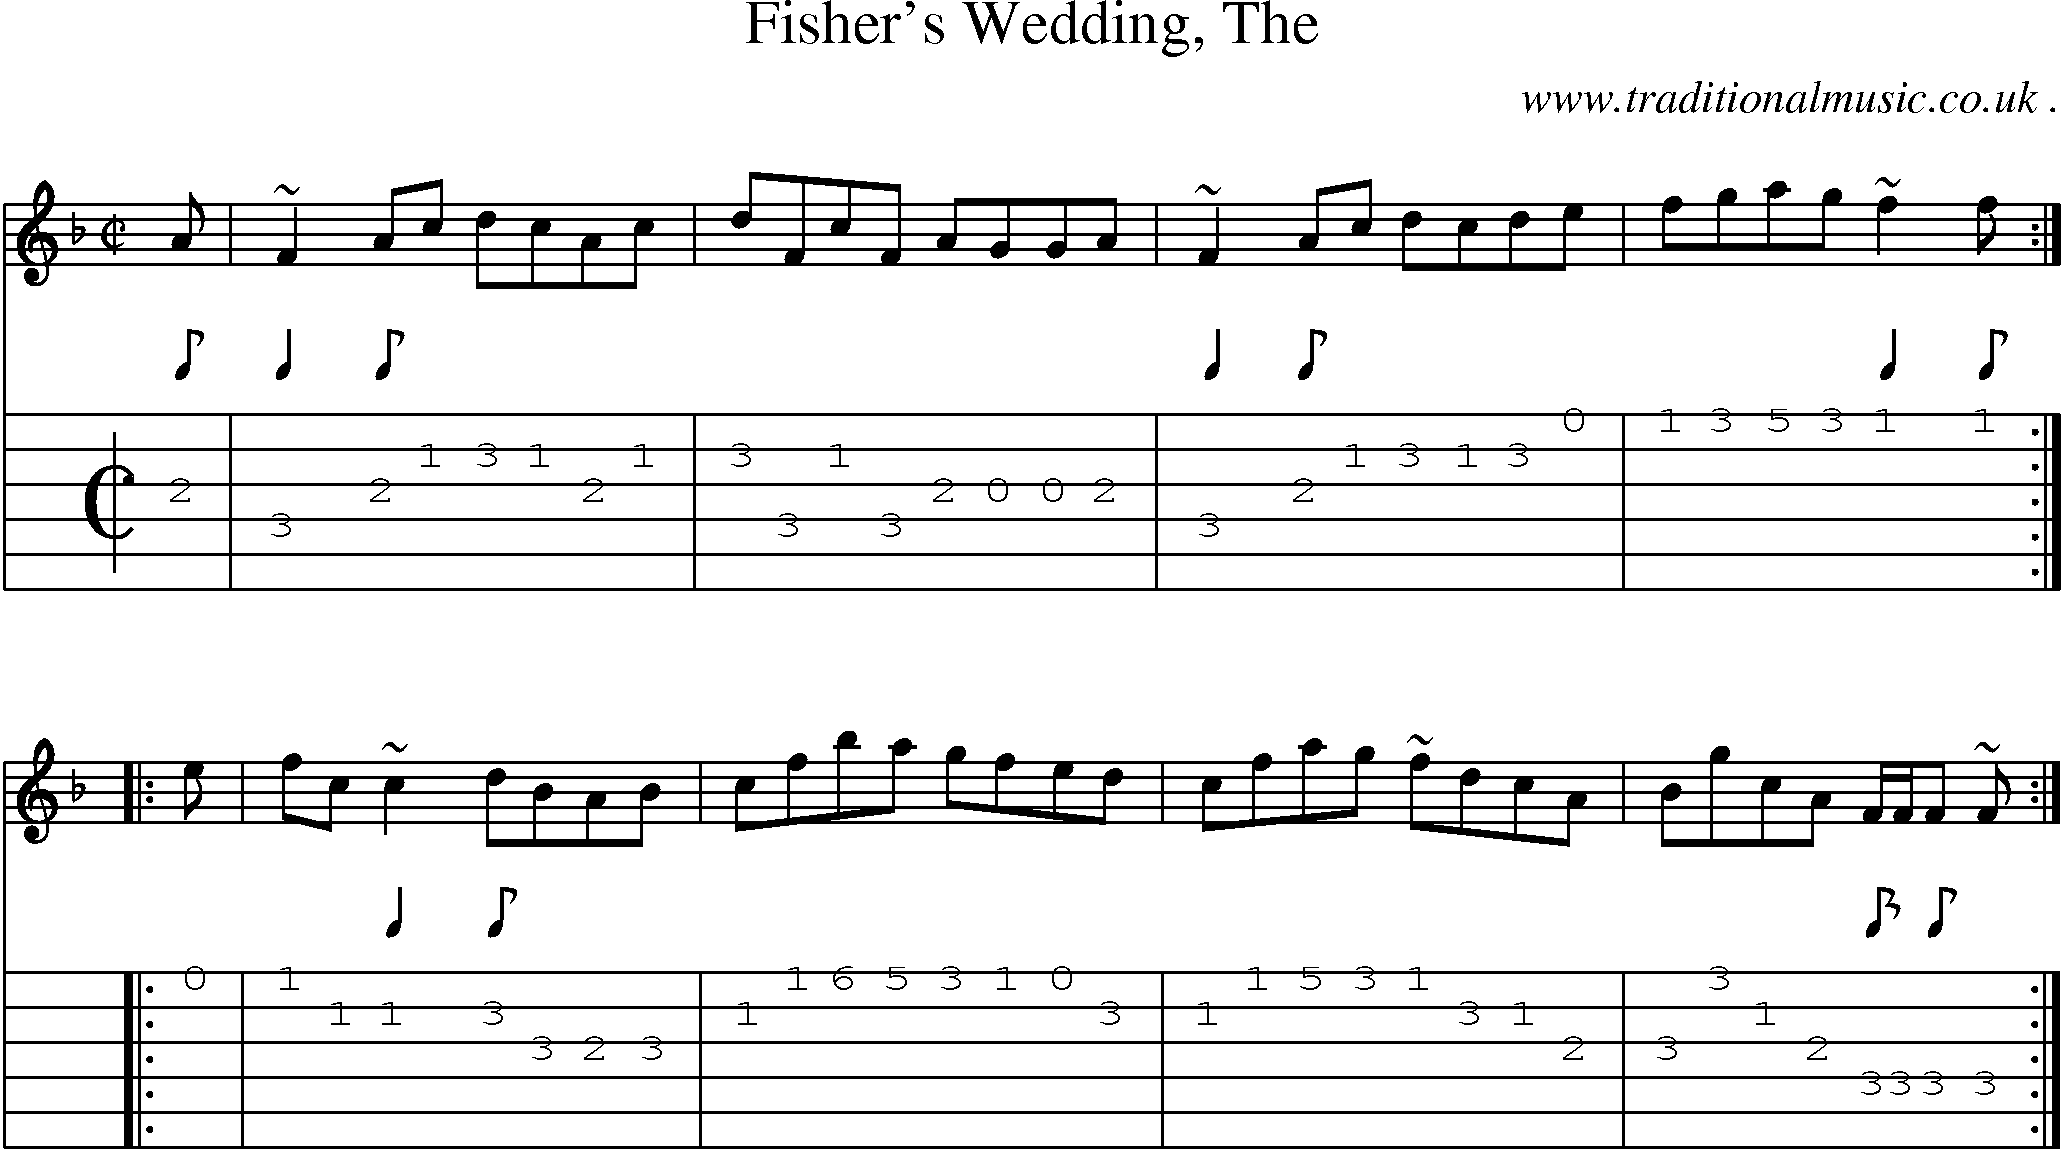 Sheet-music  score, Chords and Guitar Tabs for Fishers Wedding The